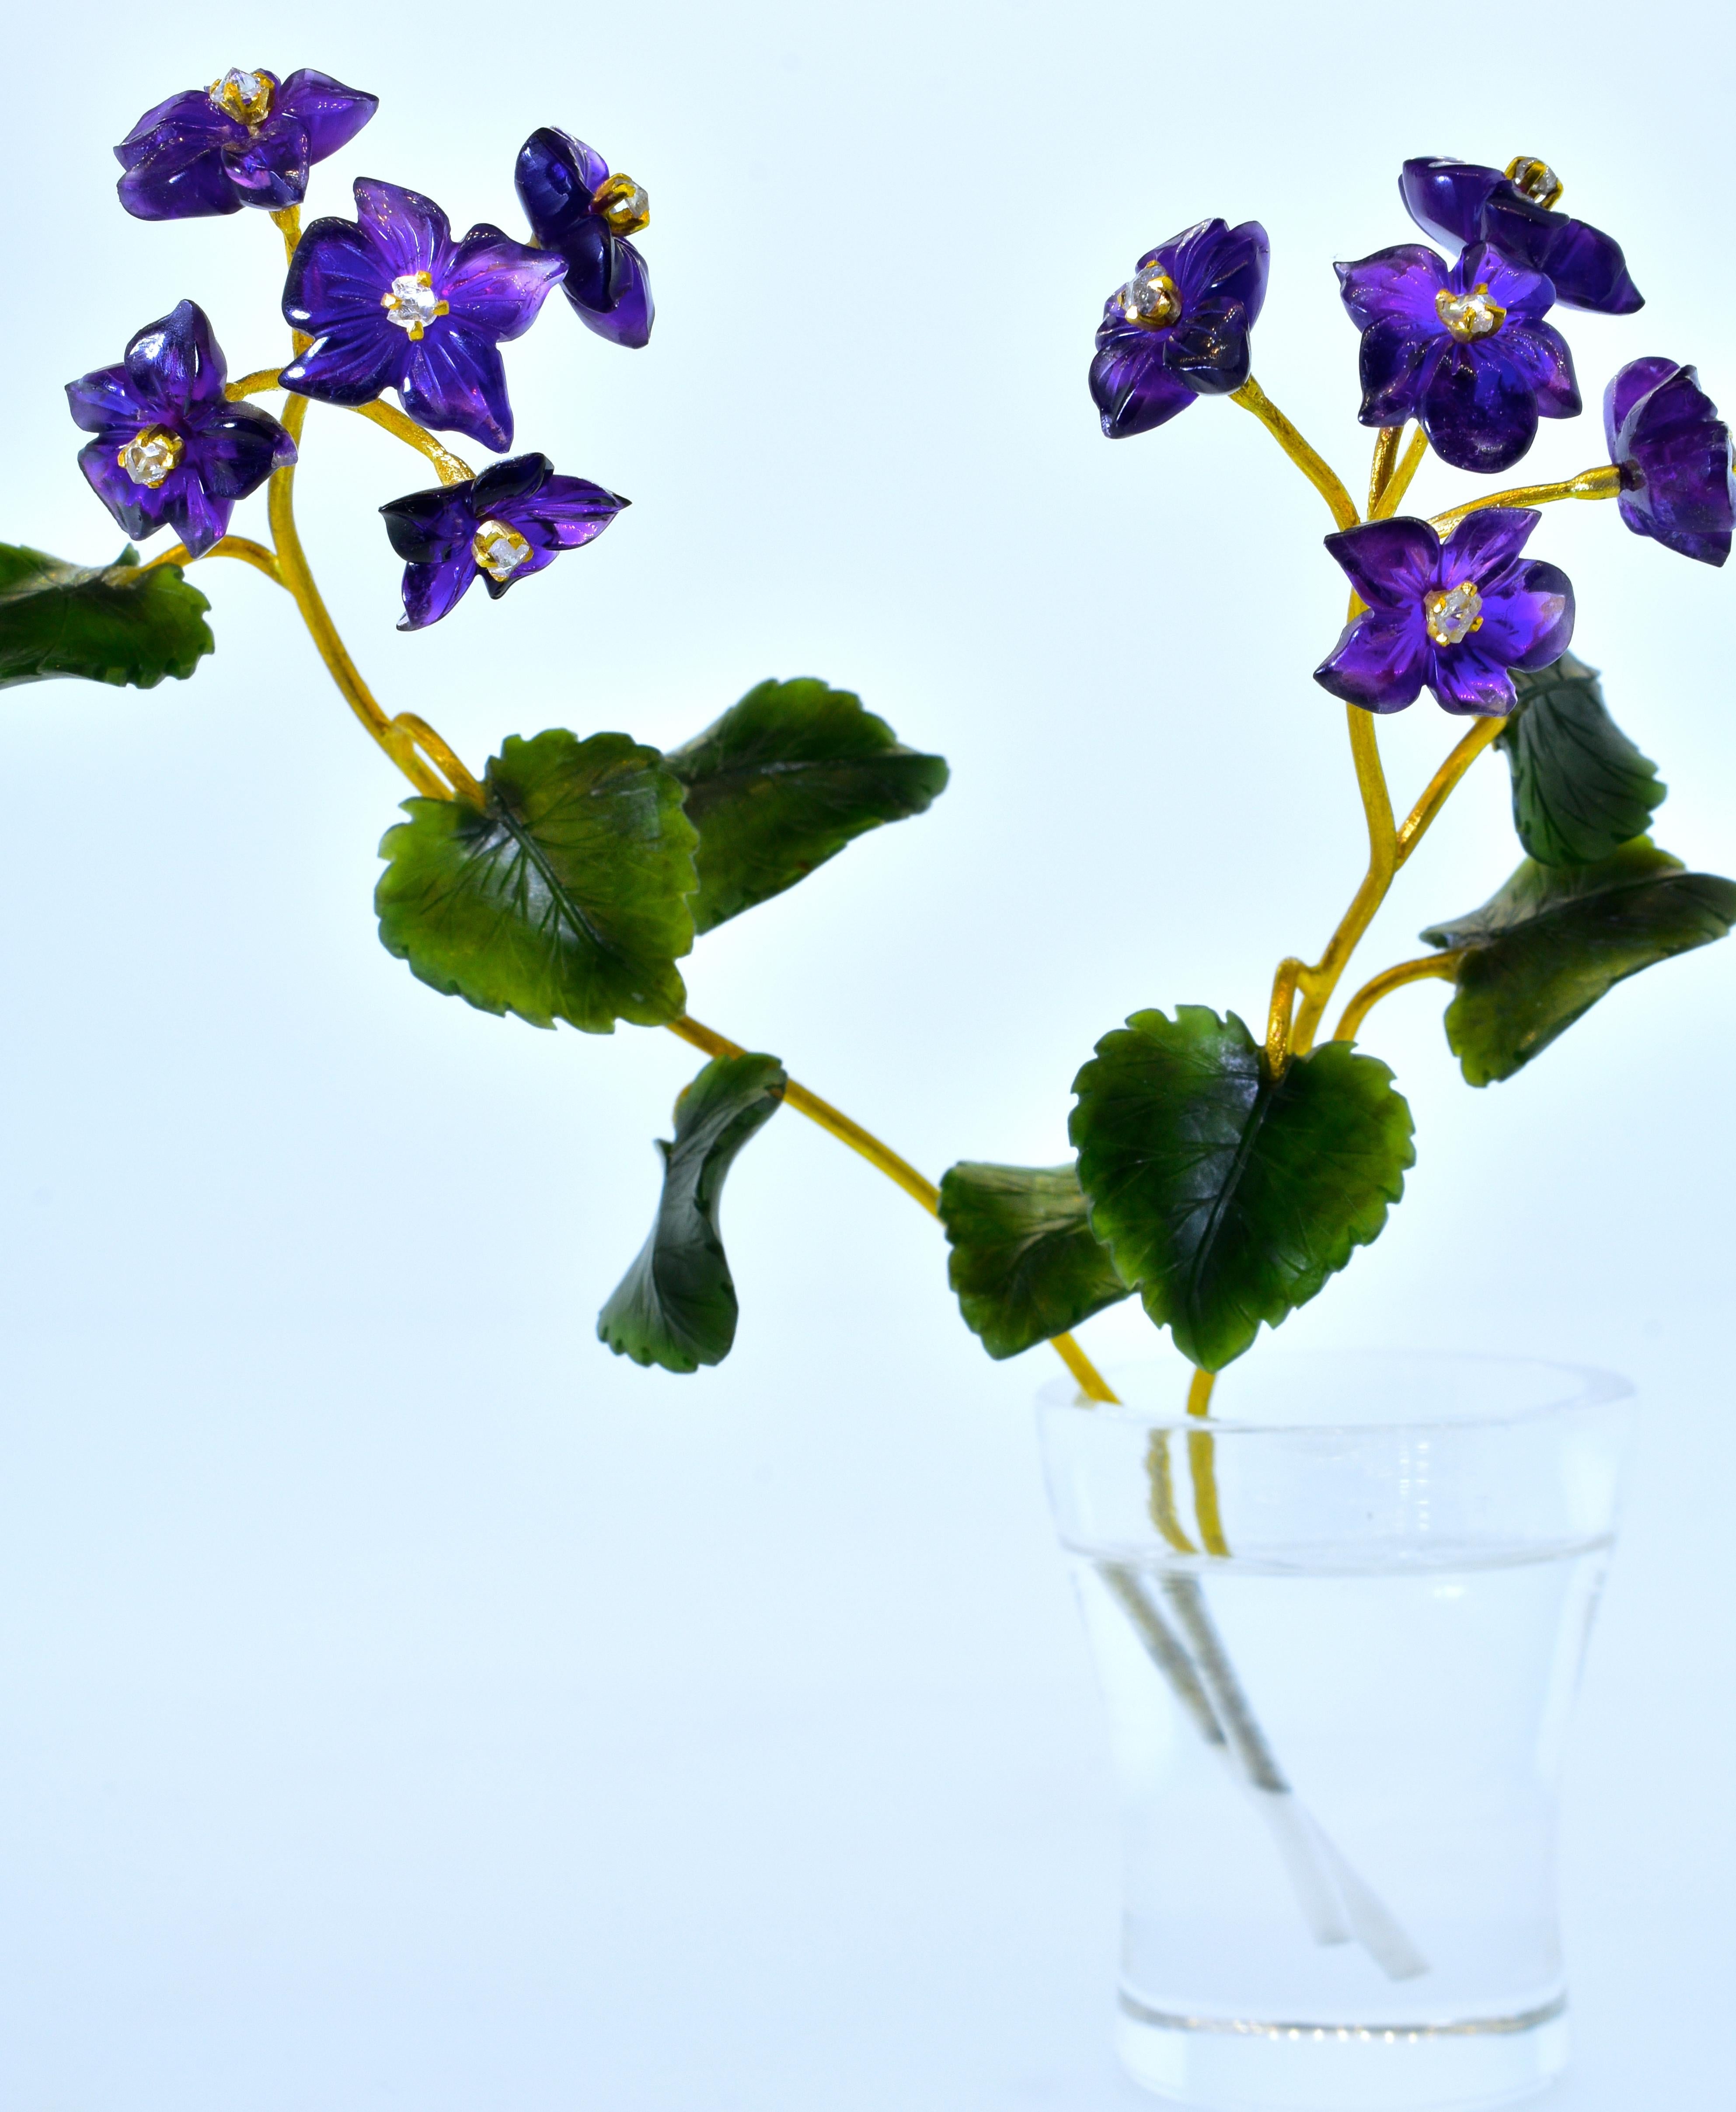 Cartier objet d'art.   A pair of freshly plucked Russian violets are placed in a shot glass of water.  In reality, the stems are 18K gold, the leaves are precisely carved Nephite (a customary hard stone), and a single amethyst depicts each 5 petaled